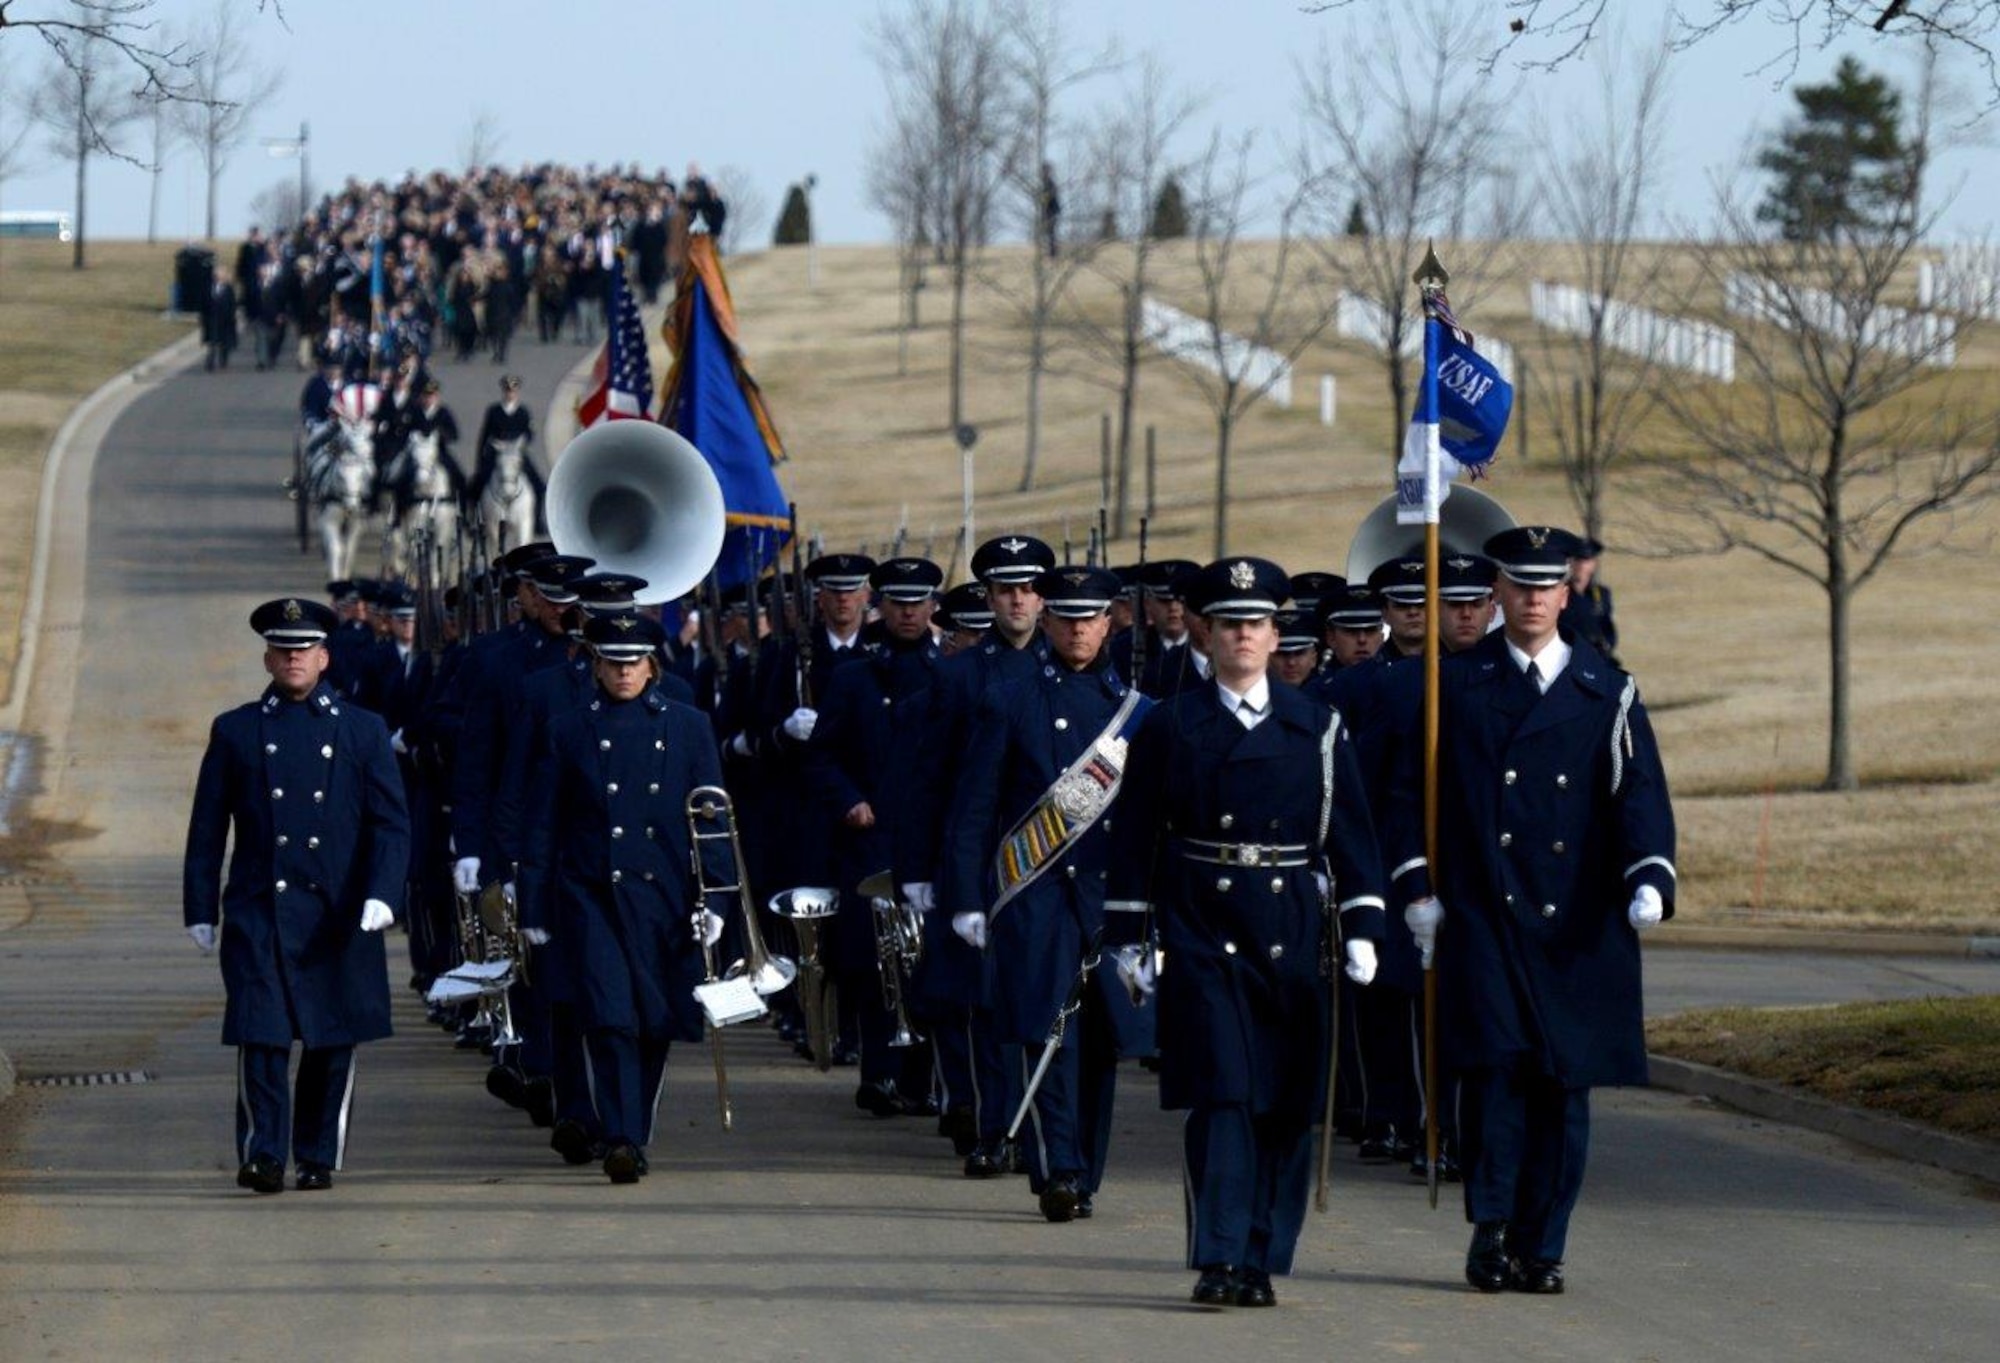 Ceremonial Guardsmen and the Band march toward the gravesite during retired Col. Leo Thorsness's full honors funeral at Arlington National Cemetery, Arlington, Va., Feb. 14, 2018. Thorsness was a Vietnam Prisoner of War and Medal of Honor recipient. (U.S. Air Force photo by Staff Sgt. Rusty Frank)